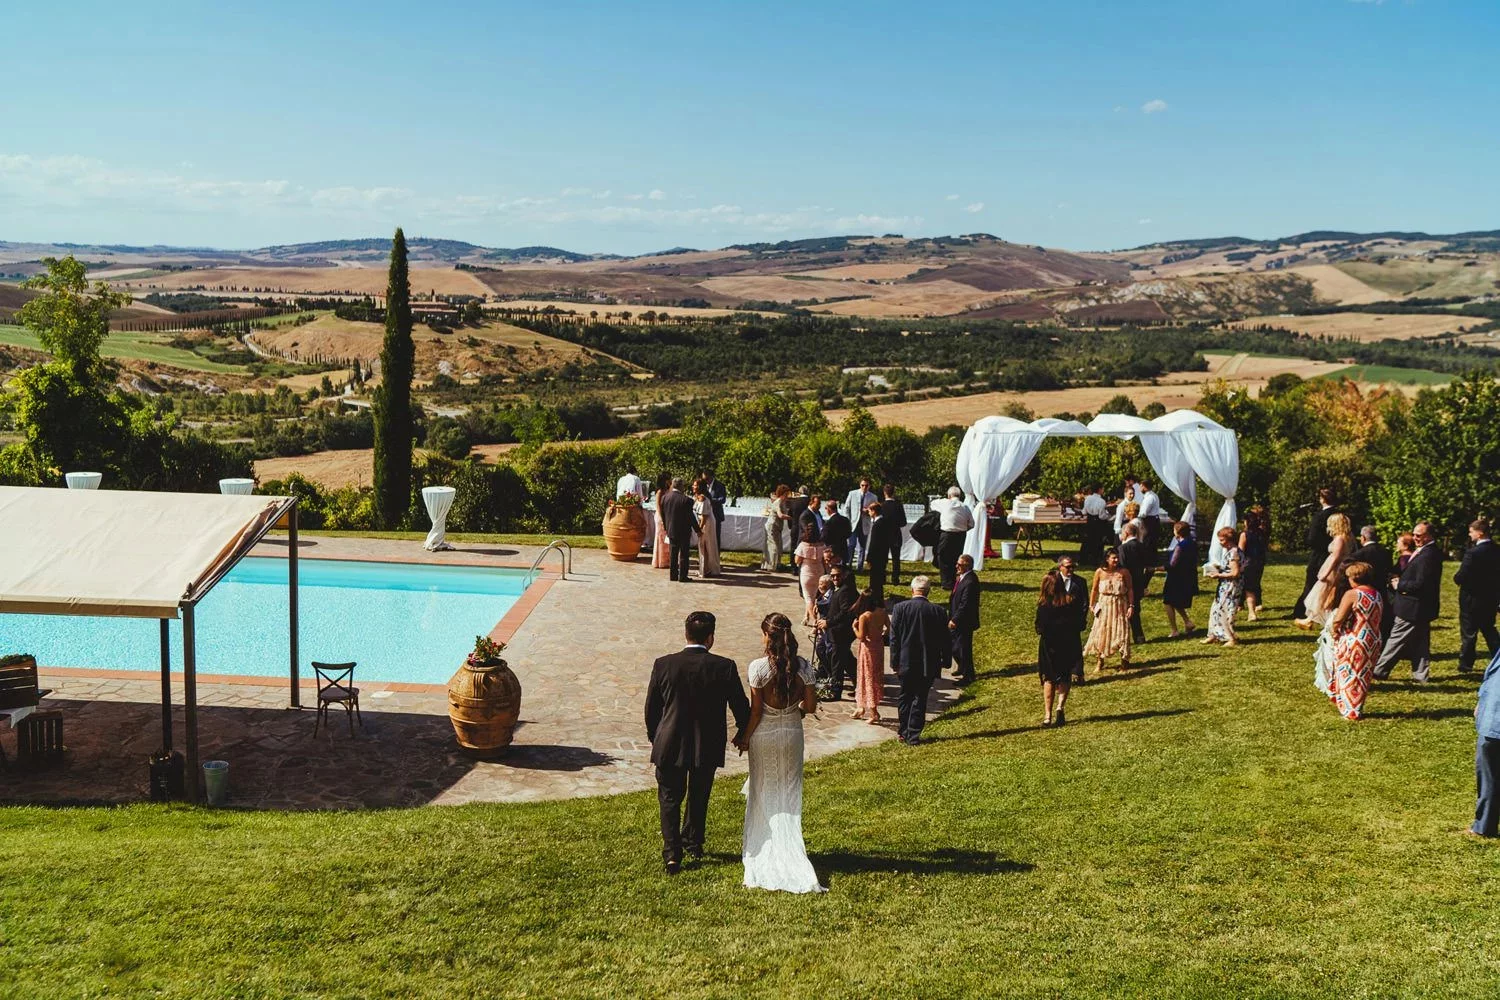 Wedding guests and a bride and groom gather in one of the best outdoor wedding venues in Europe, Borgo Di Castelvecchio.